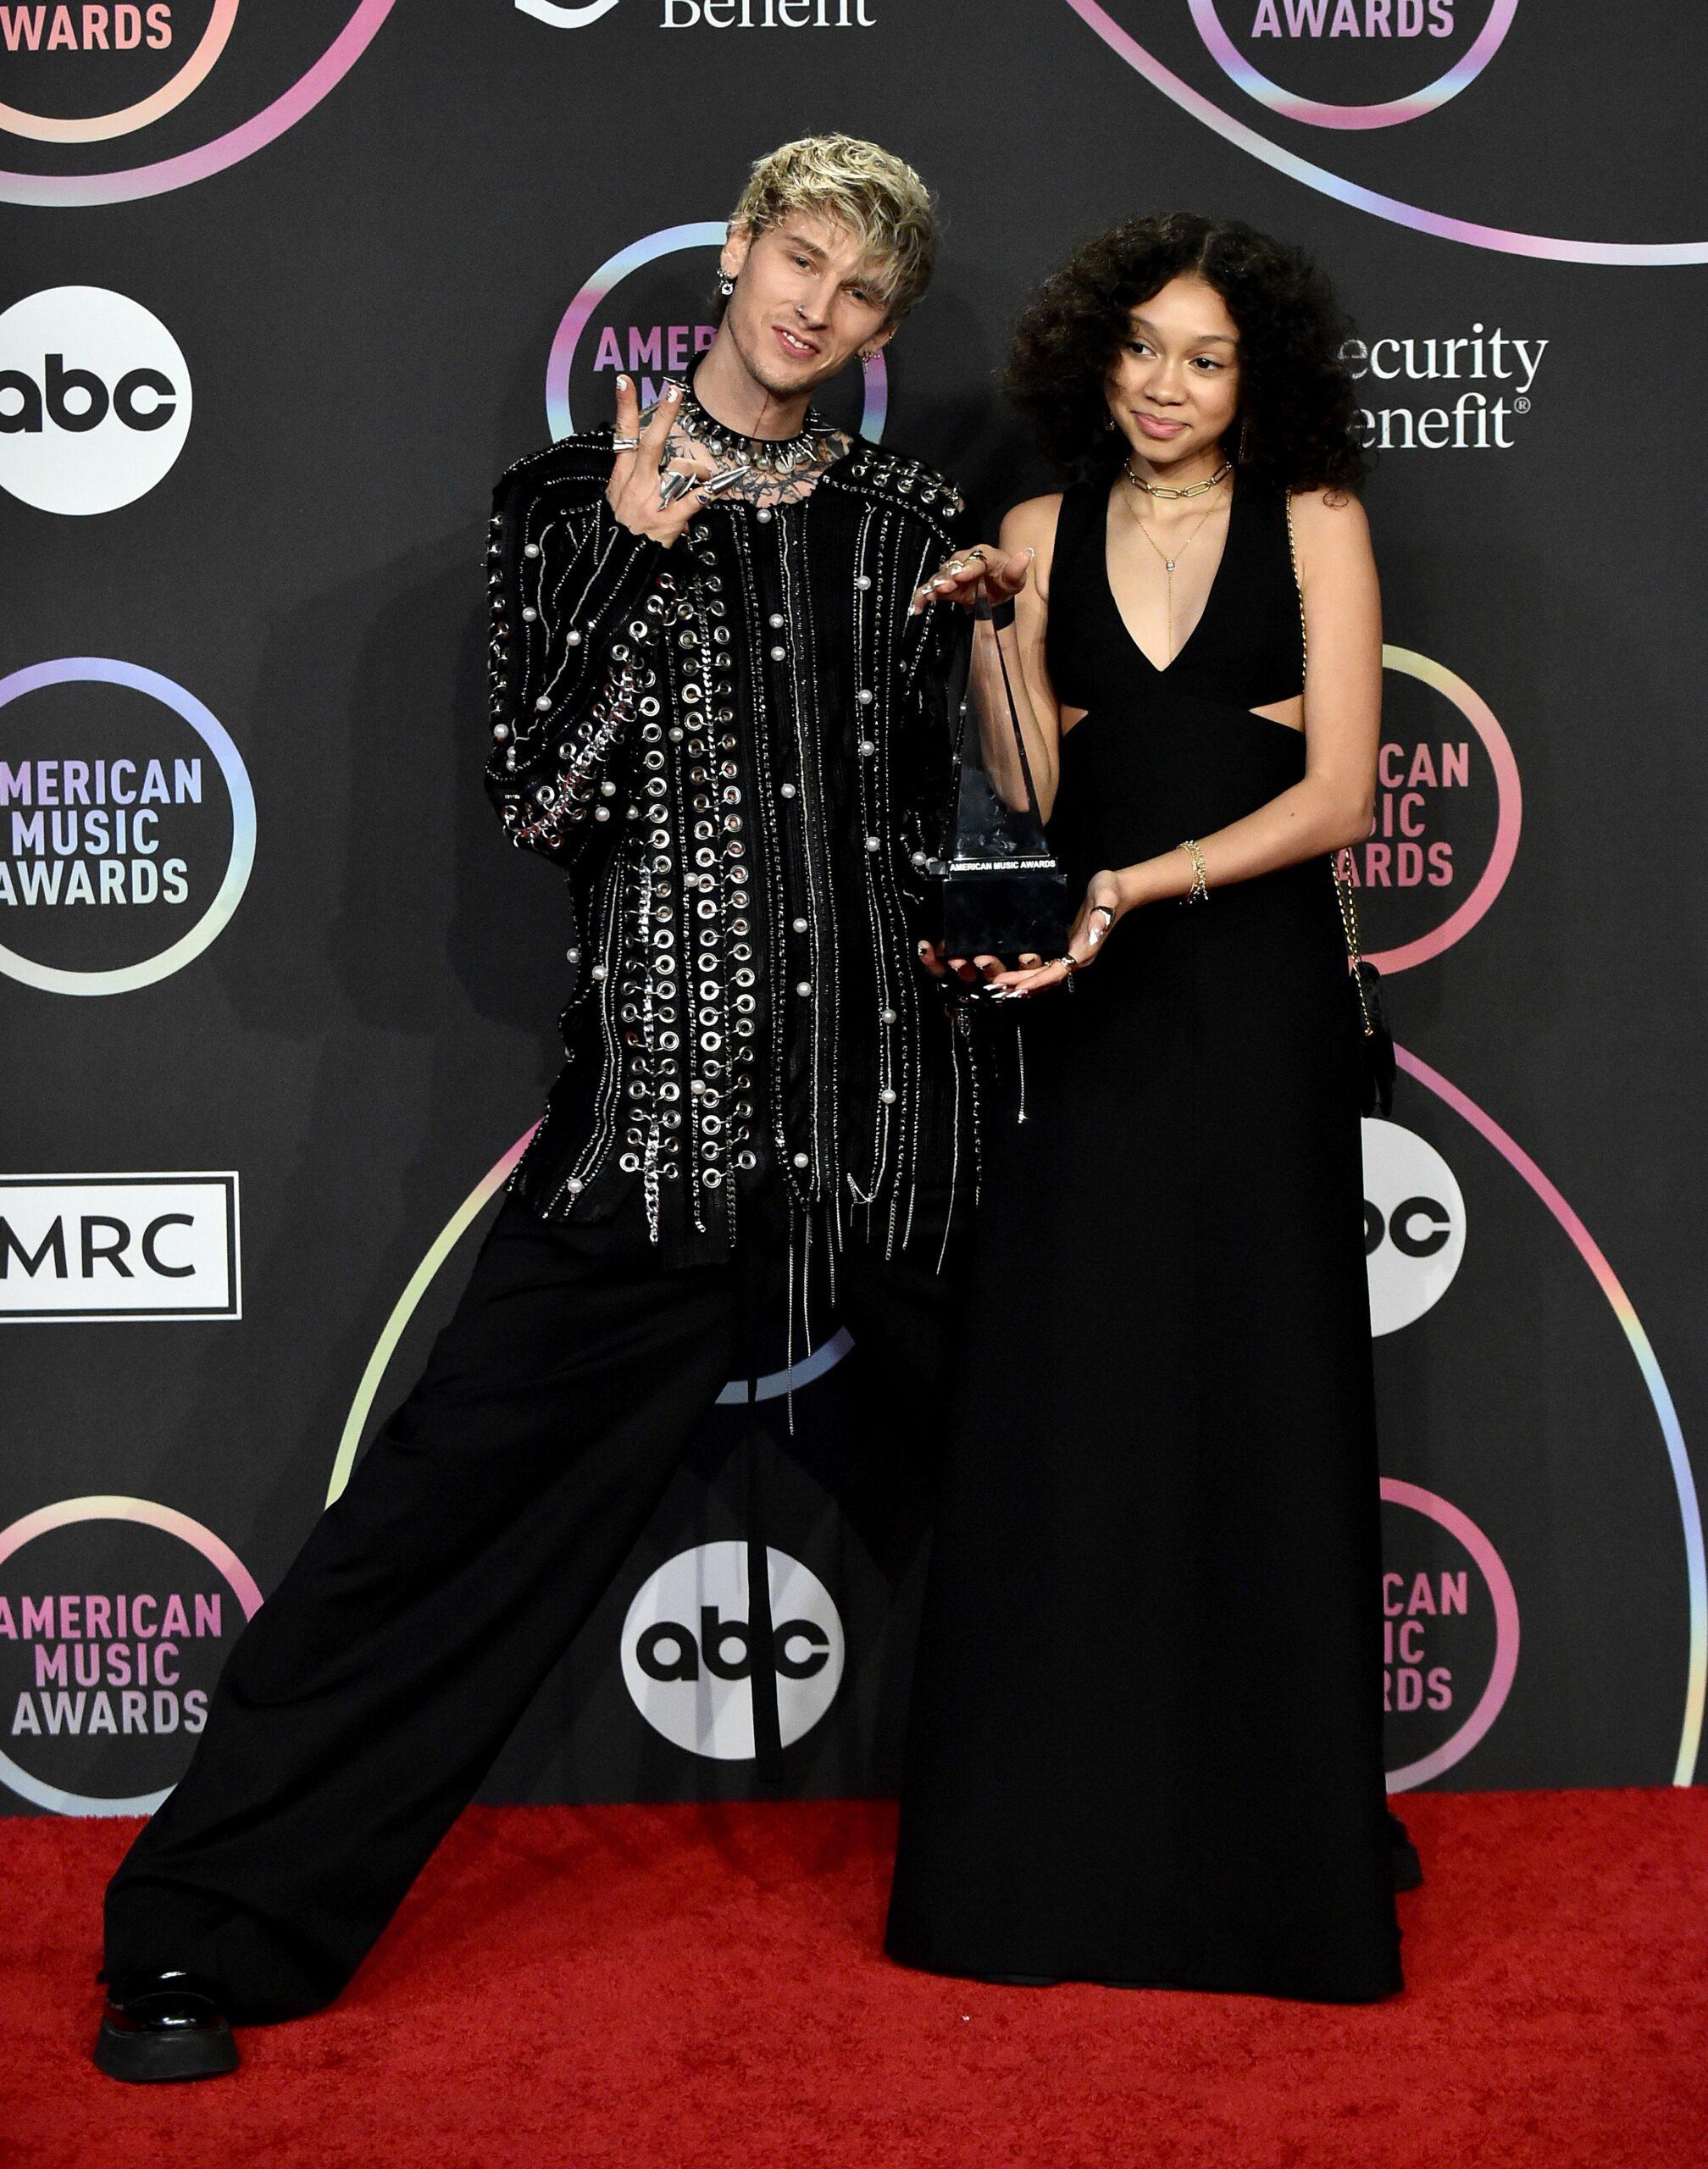 Machine Gun Kelly and daughter pose for the camera.